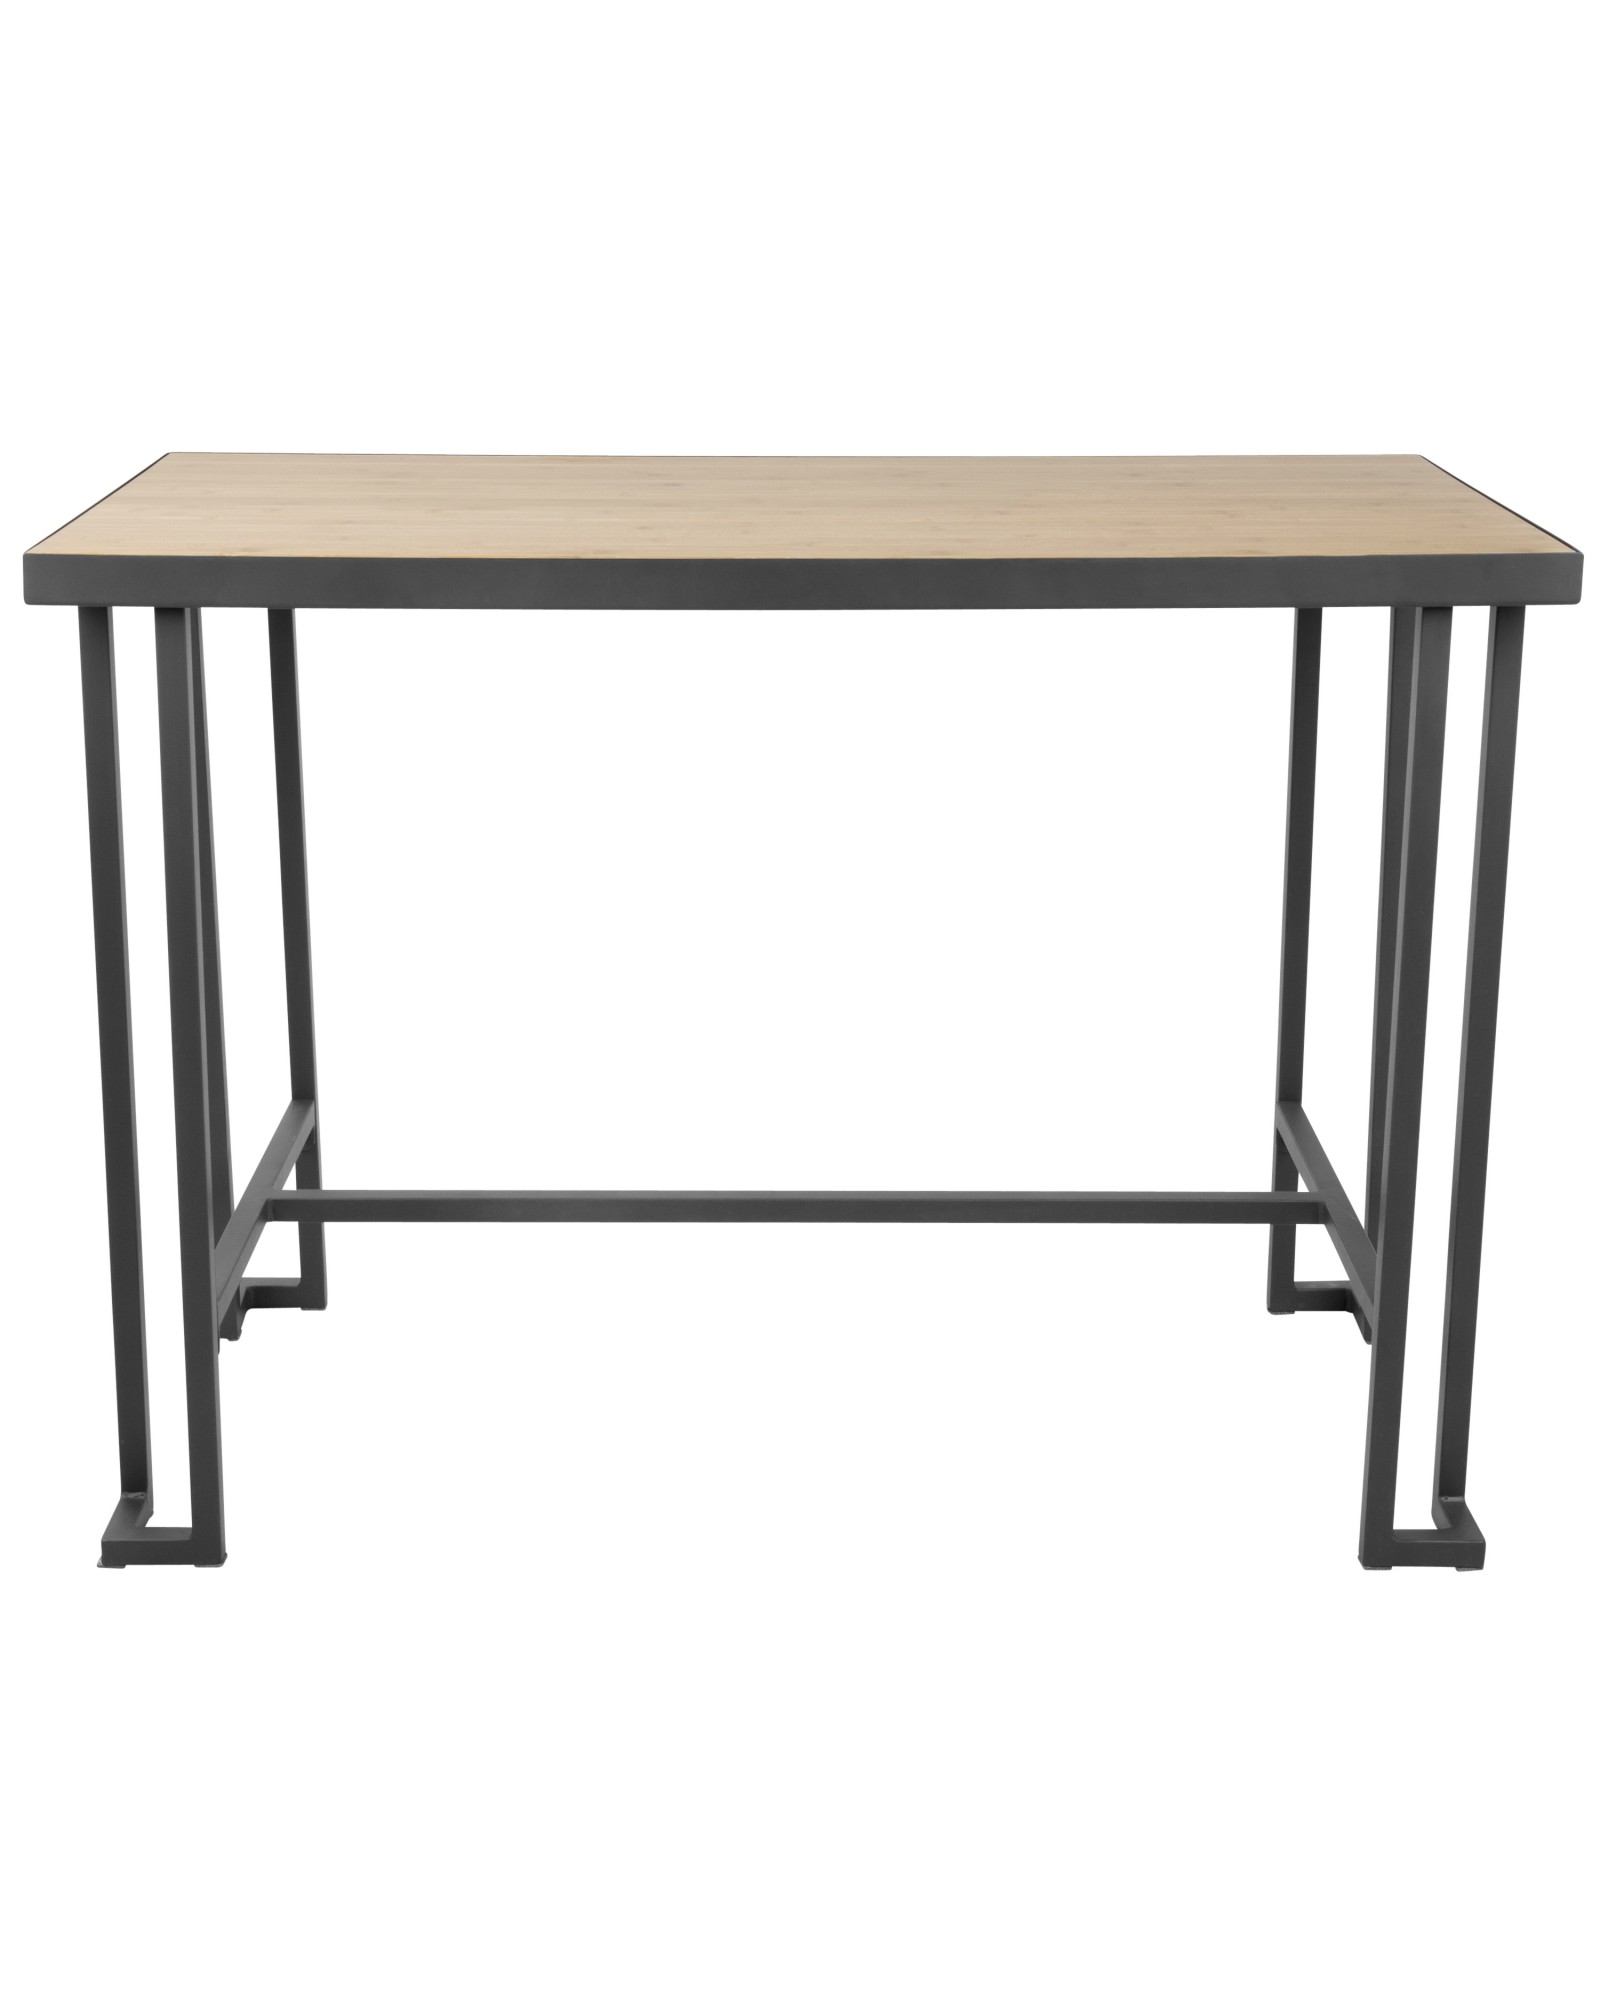 Roman Industrial Counter Table in Grey and Natural